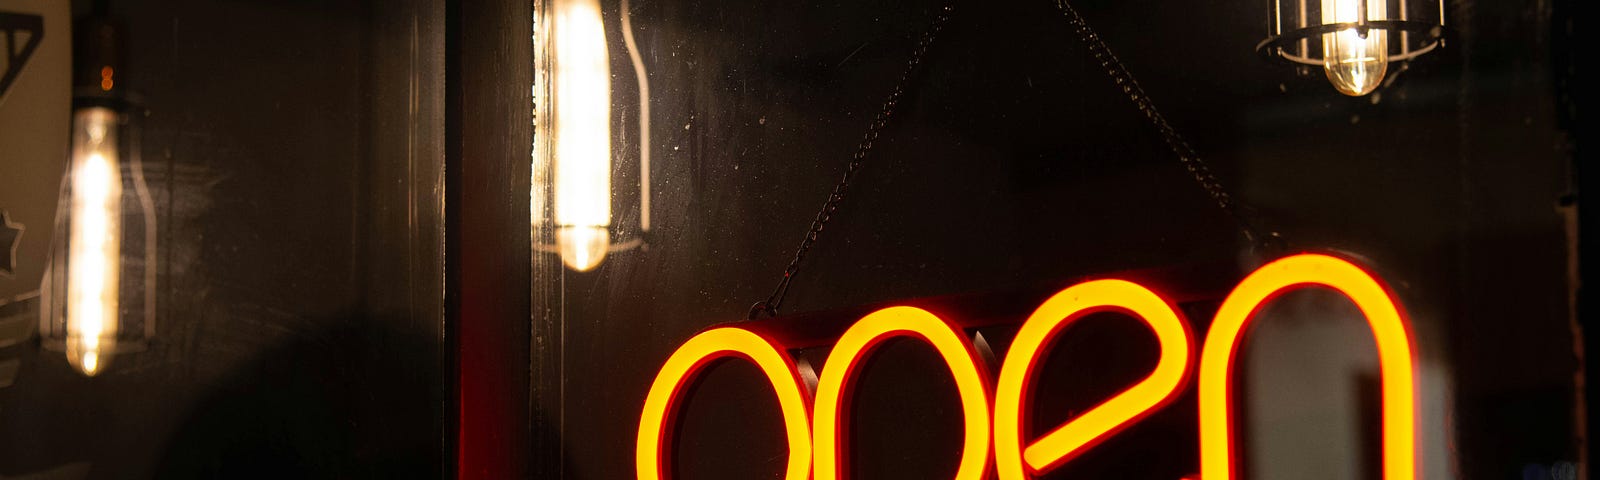 A yellow sign that says OPEN, against a dark background with some lightbulbs